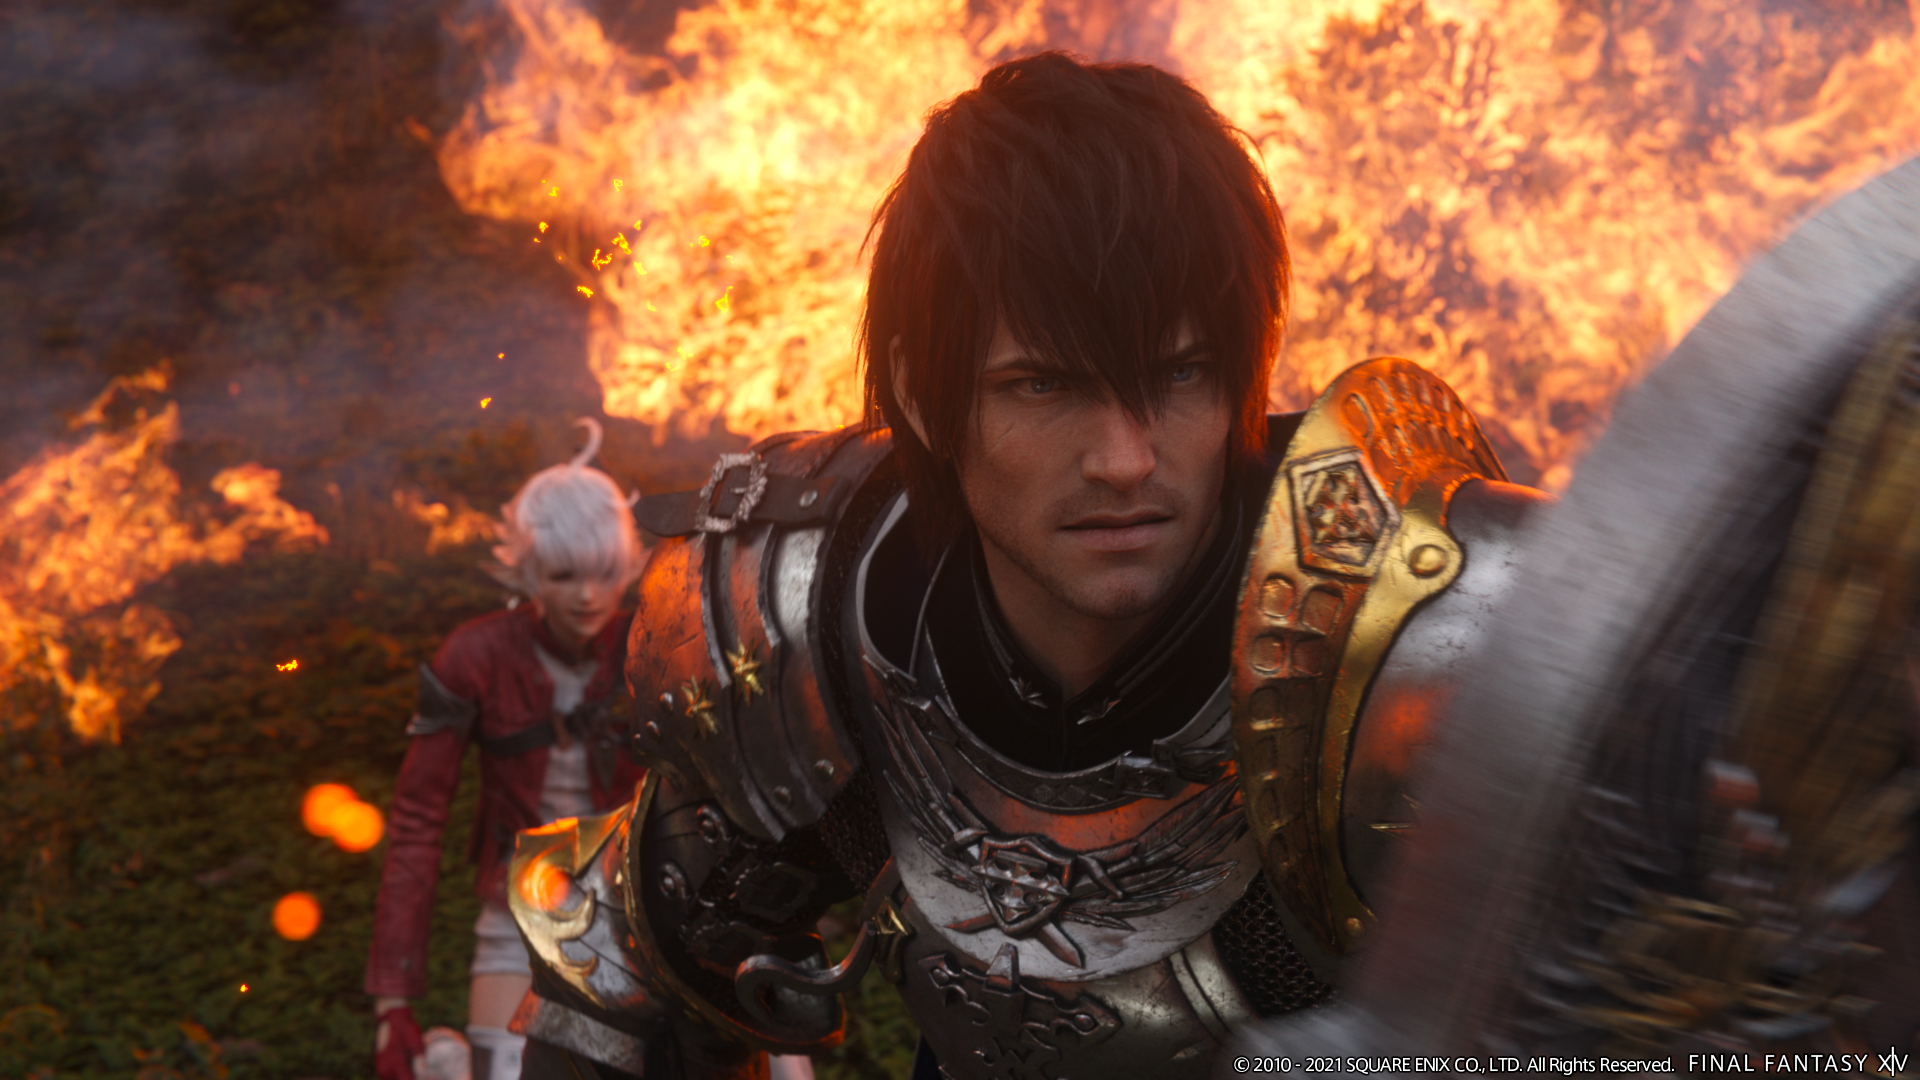 Image for Final Fantasy 14 has over 22 million registered players